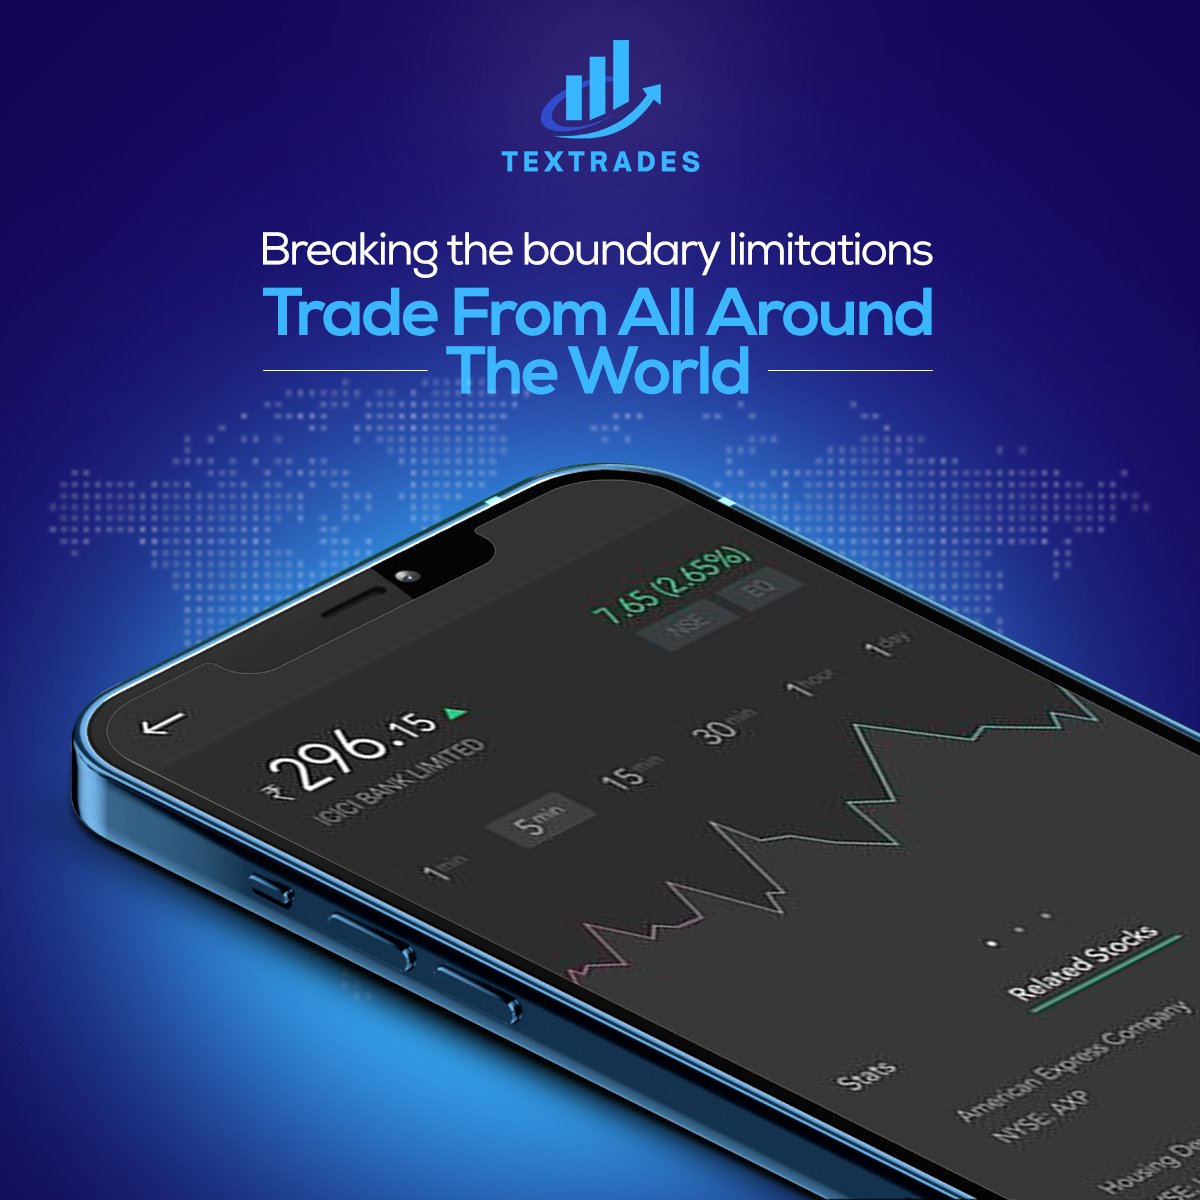 🌍✨ Textrades breaks boundaries! 
With our platform, trading knows no limits. Wherever you are in the world, seize the opportunity to trade and thrive. 

Join us in redefining the possibilities of global trading! 🚀🌐 

#Textrades #GlobalTrading #BreakingBoundaries